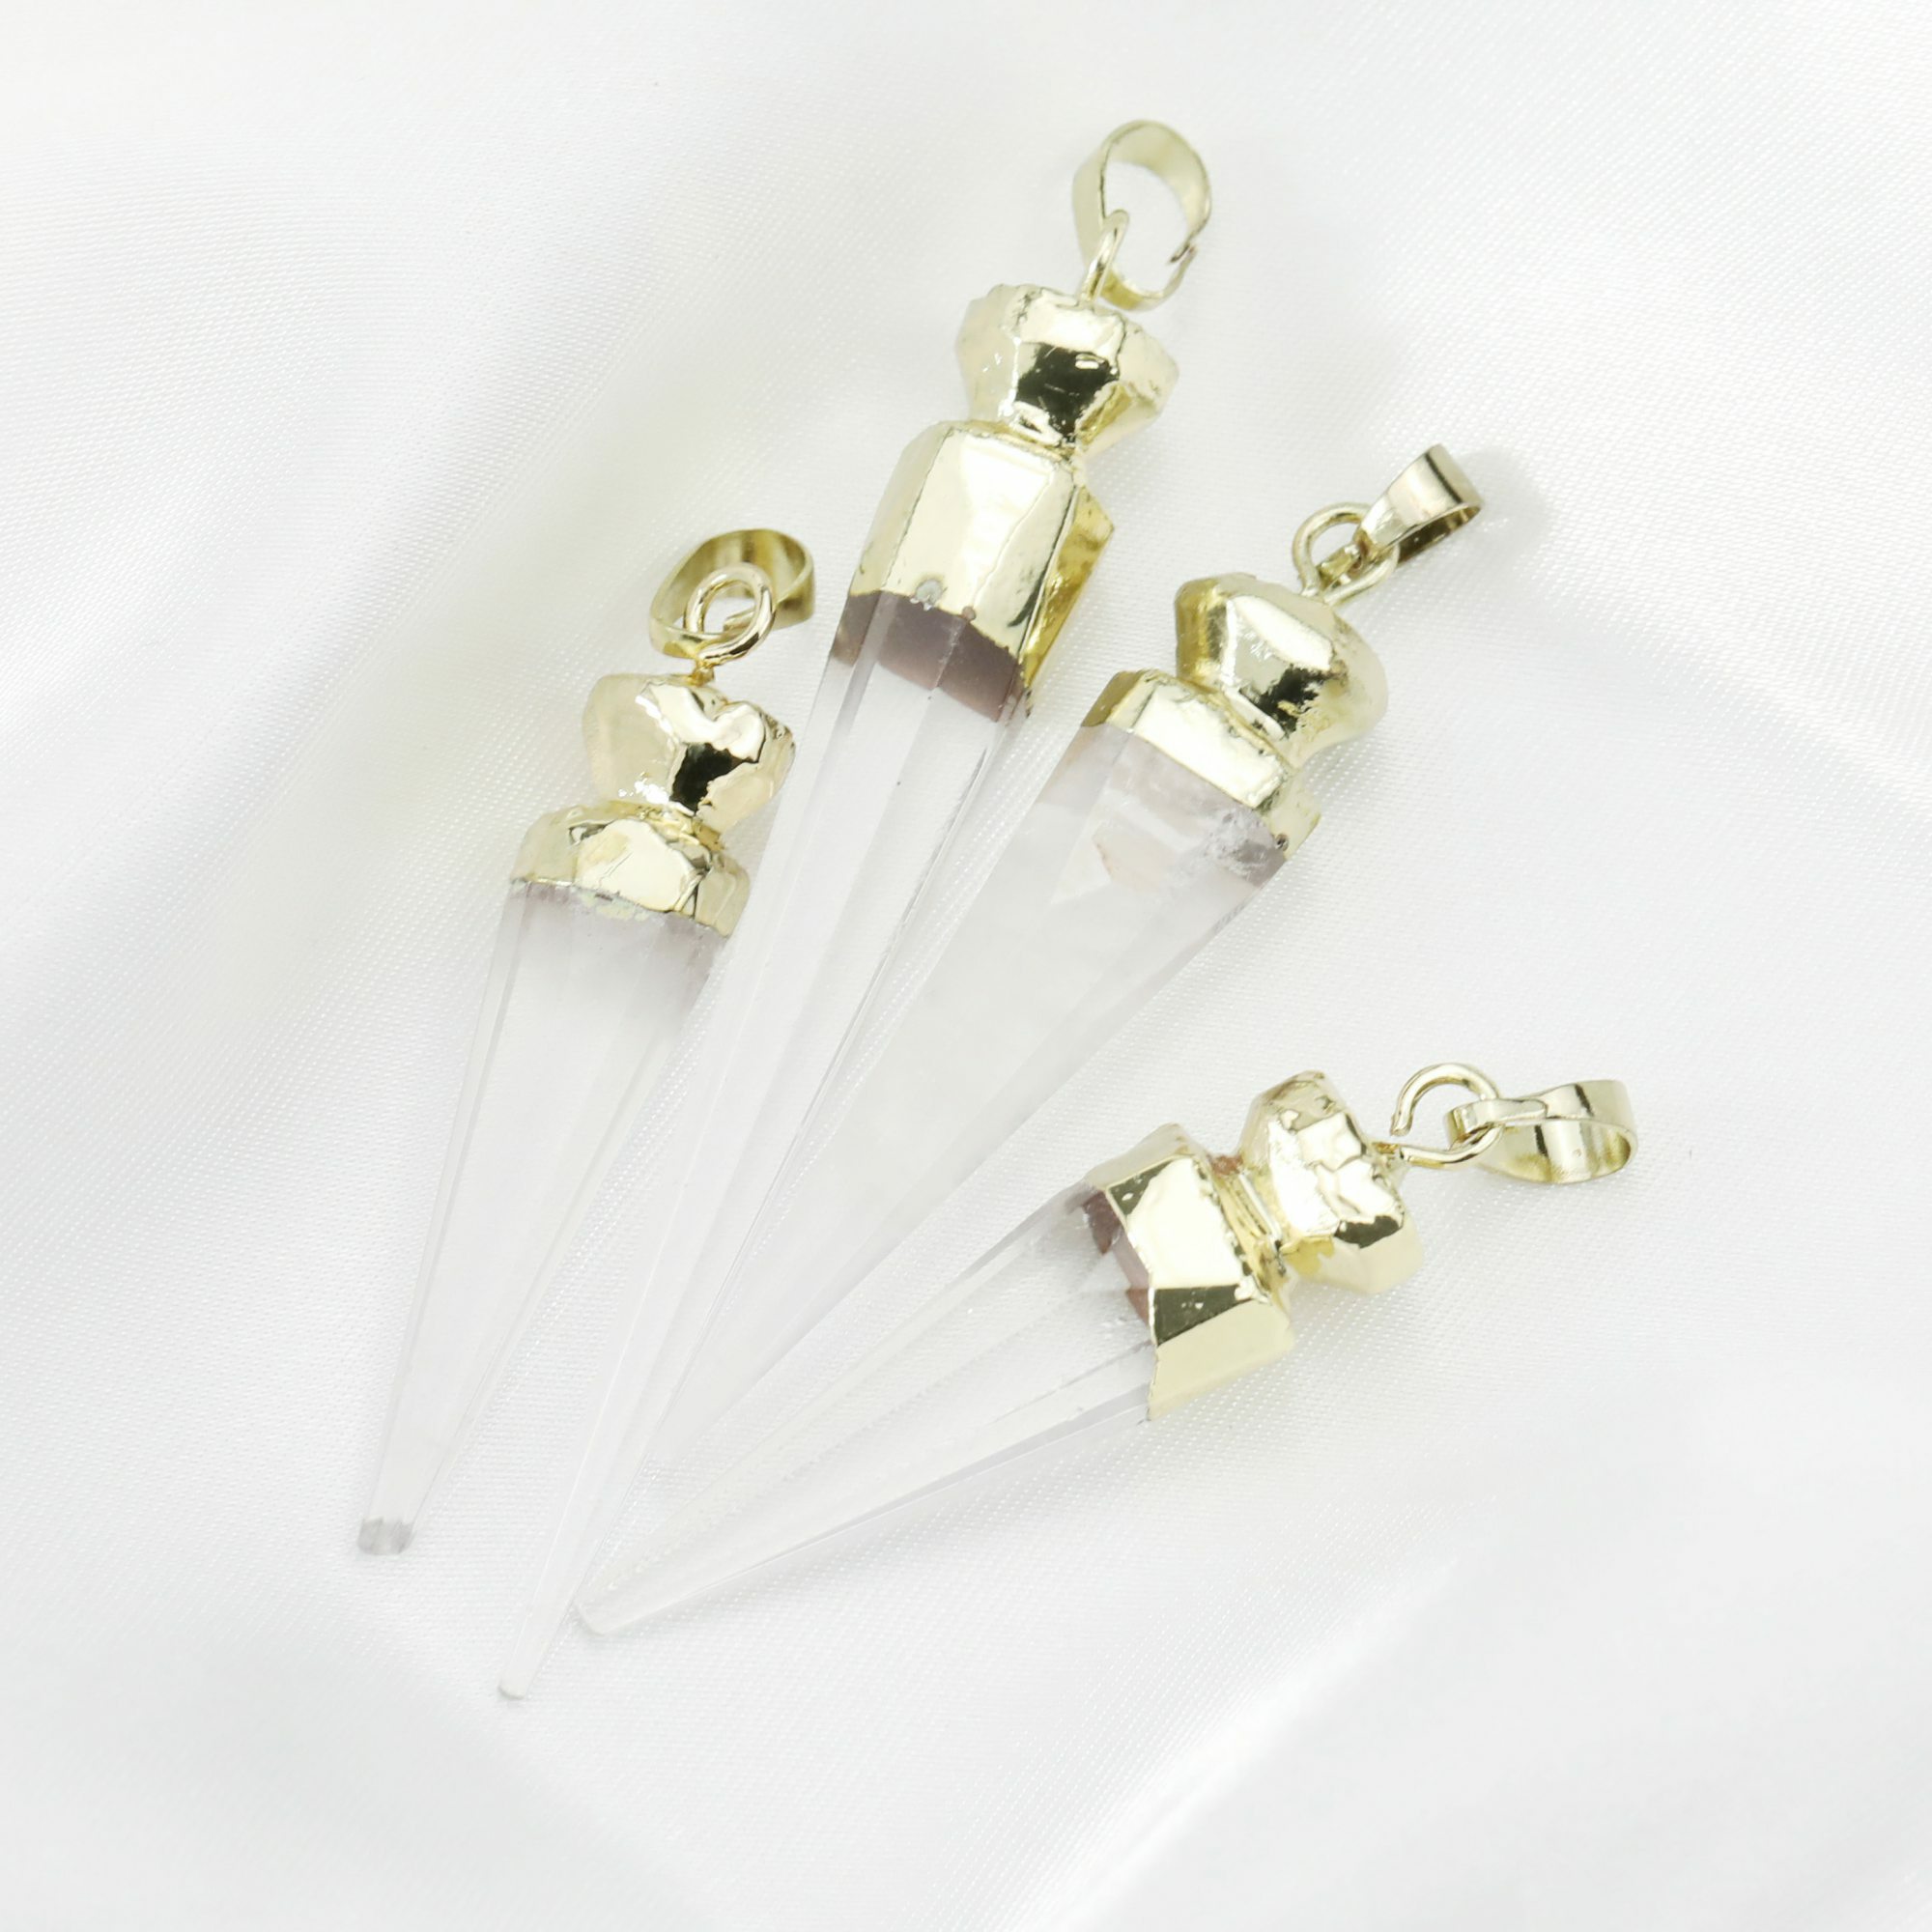 5Pcs Sharp Crystal Pendant with Light Gold Bail Charm DIY Supplies 3-5CM Long 1800524 - Click Image to Close